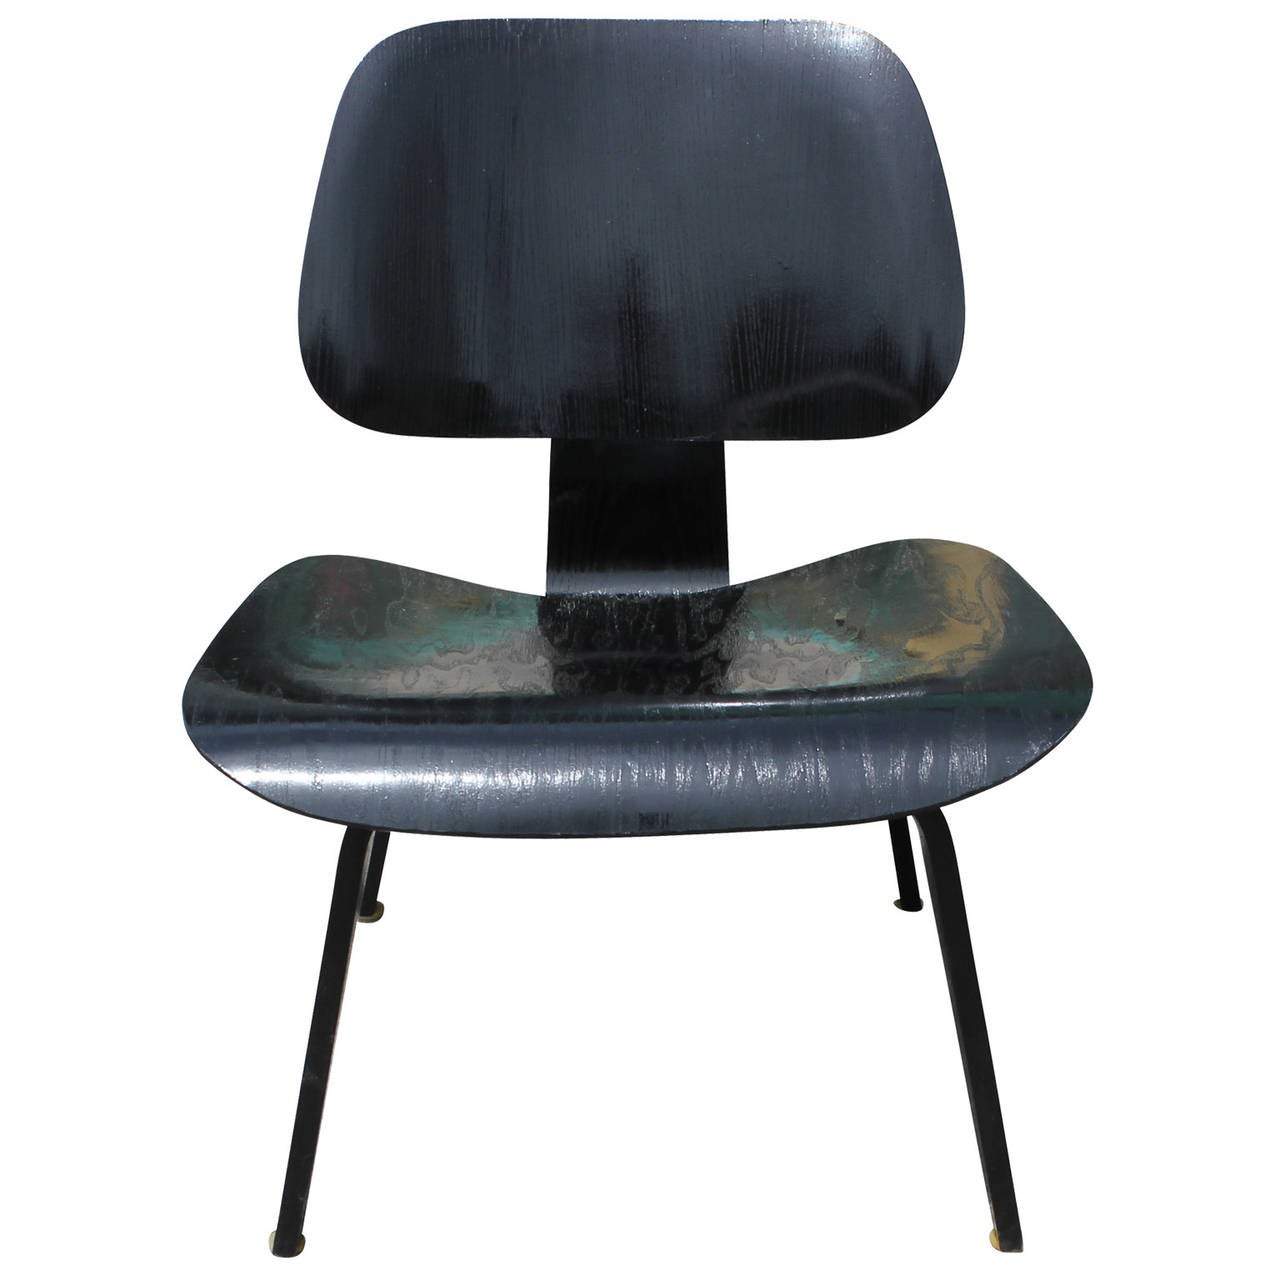 Early Black Eames LCW chair by Herman Miller. Chairs is from circa 1955. Original Black Dye at some point has be cover with a clear coat giving it a bit of shine.